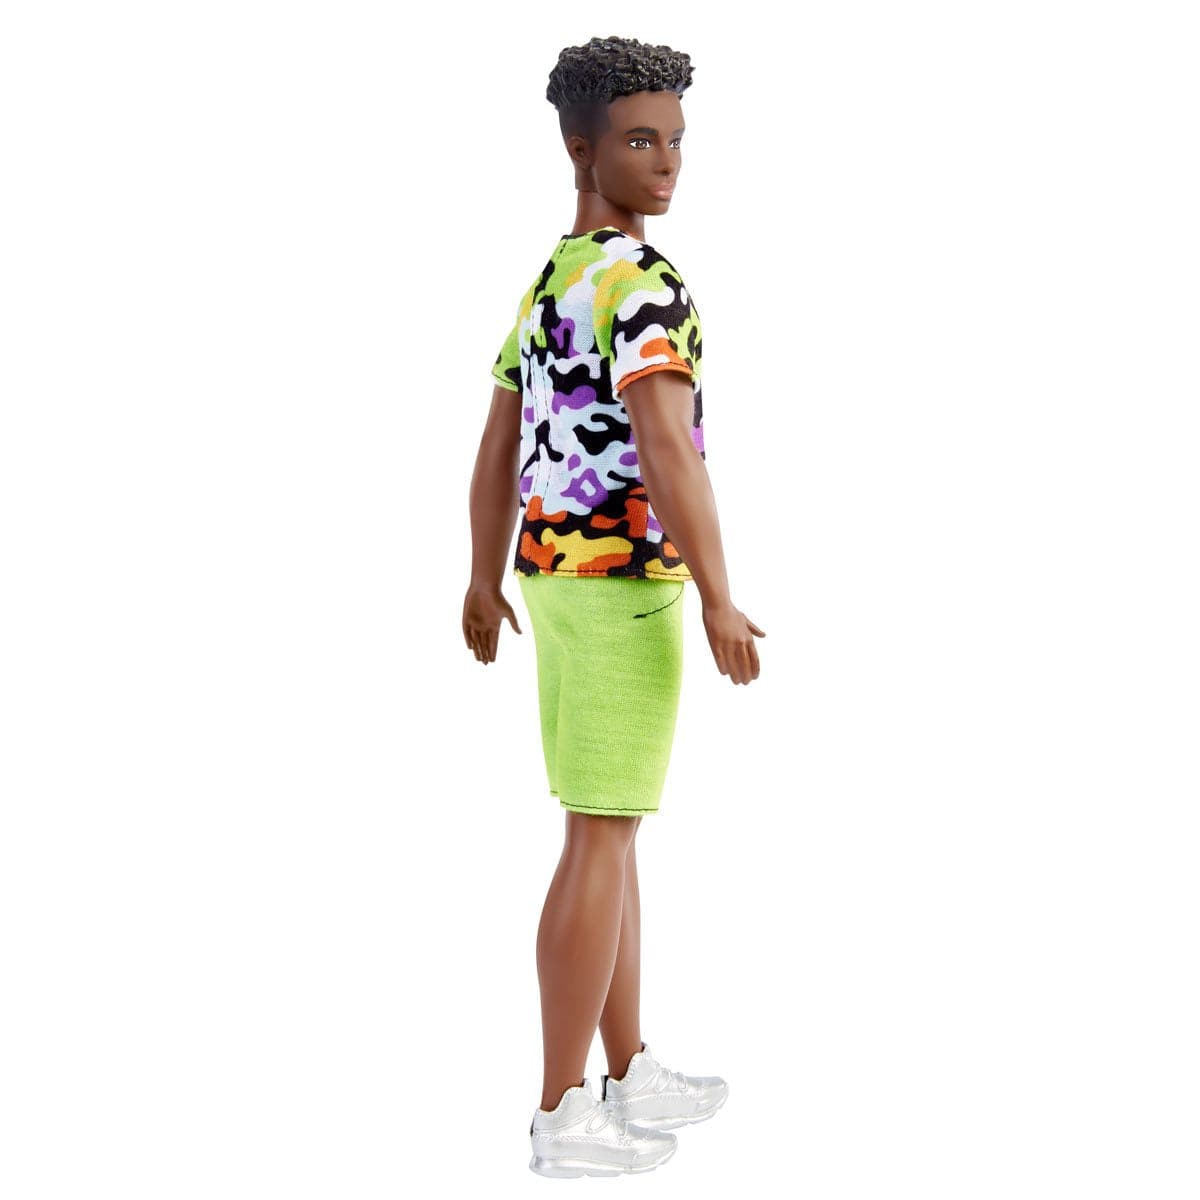 Ken Fashionista Doll #183 with Camo Print Top